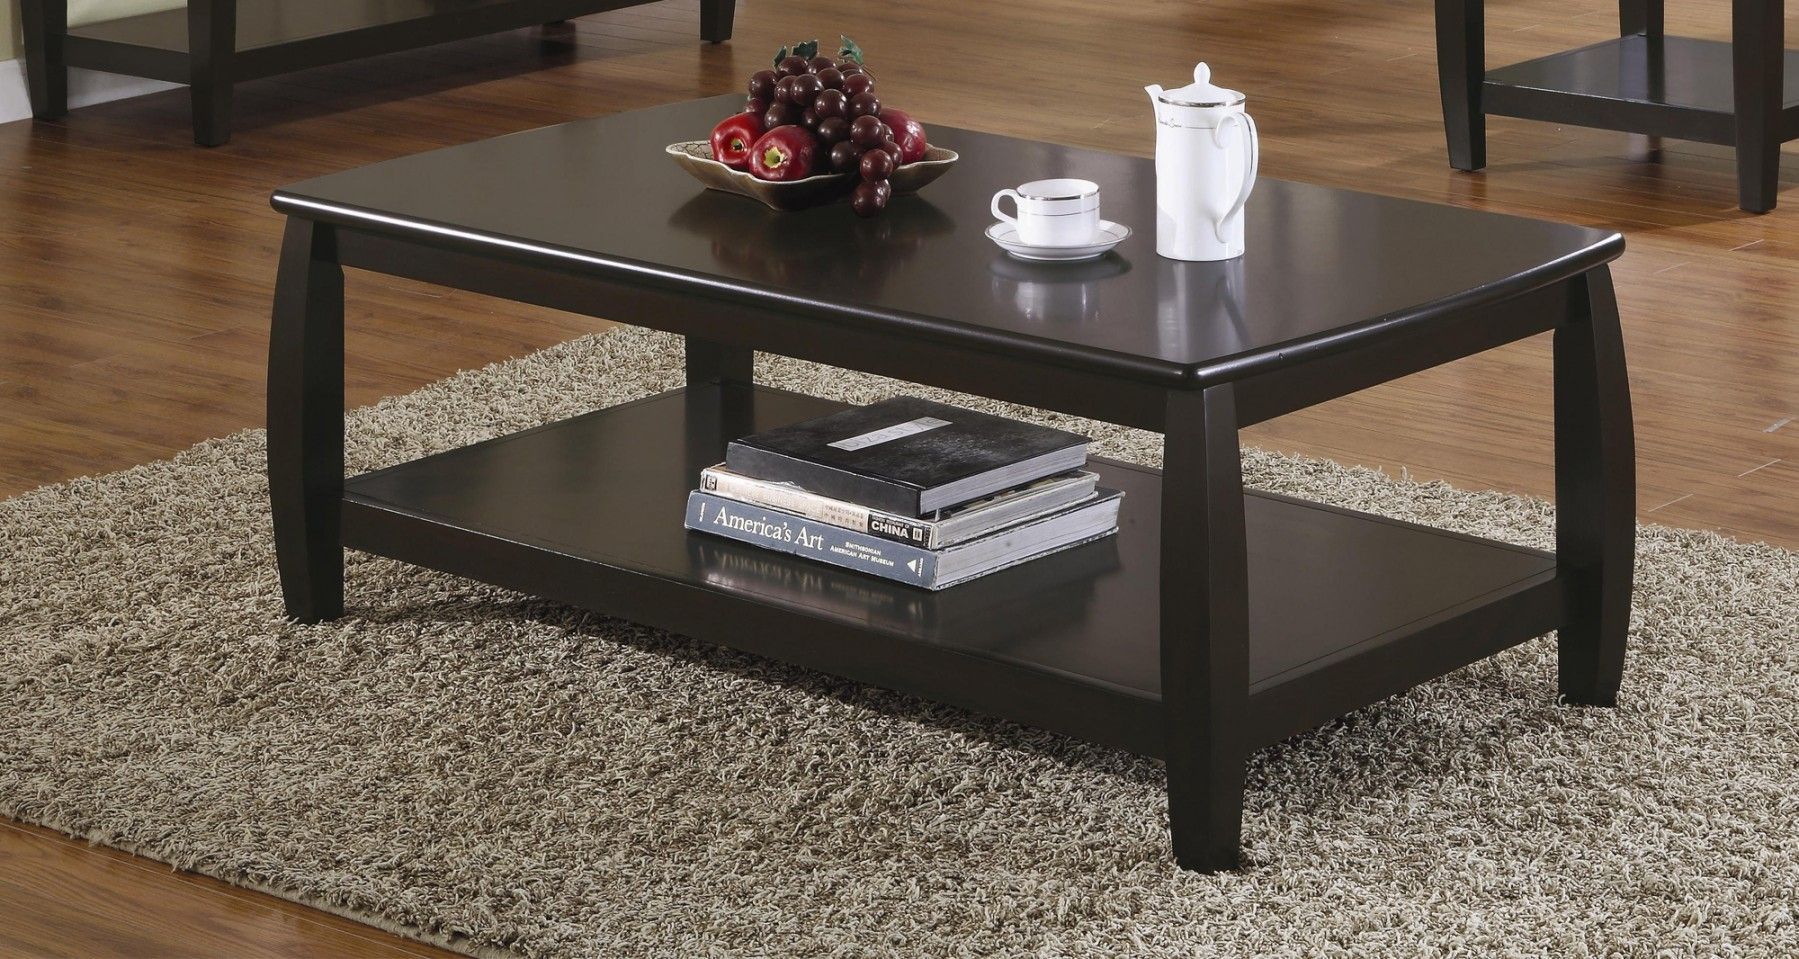 Coaster Wood Top Espresso Coffee Table With 1 Shelf Intended For 1 Shelf Coffee Tables (View 5 of 15)